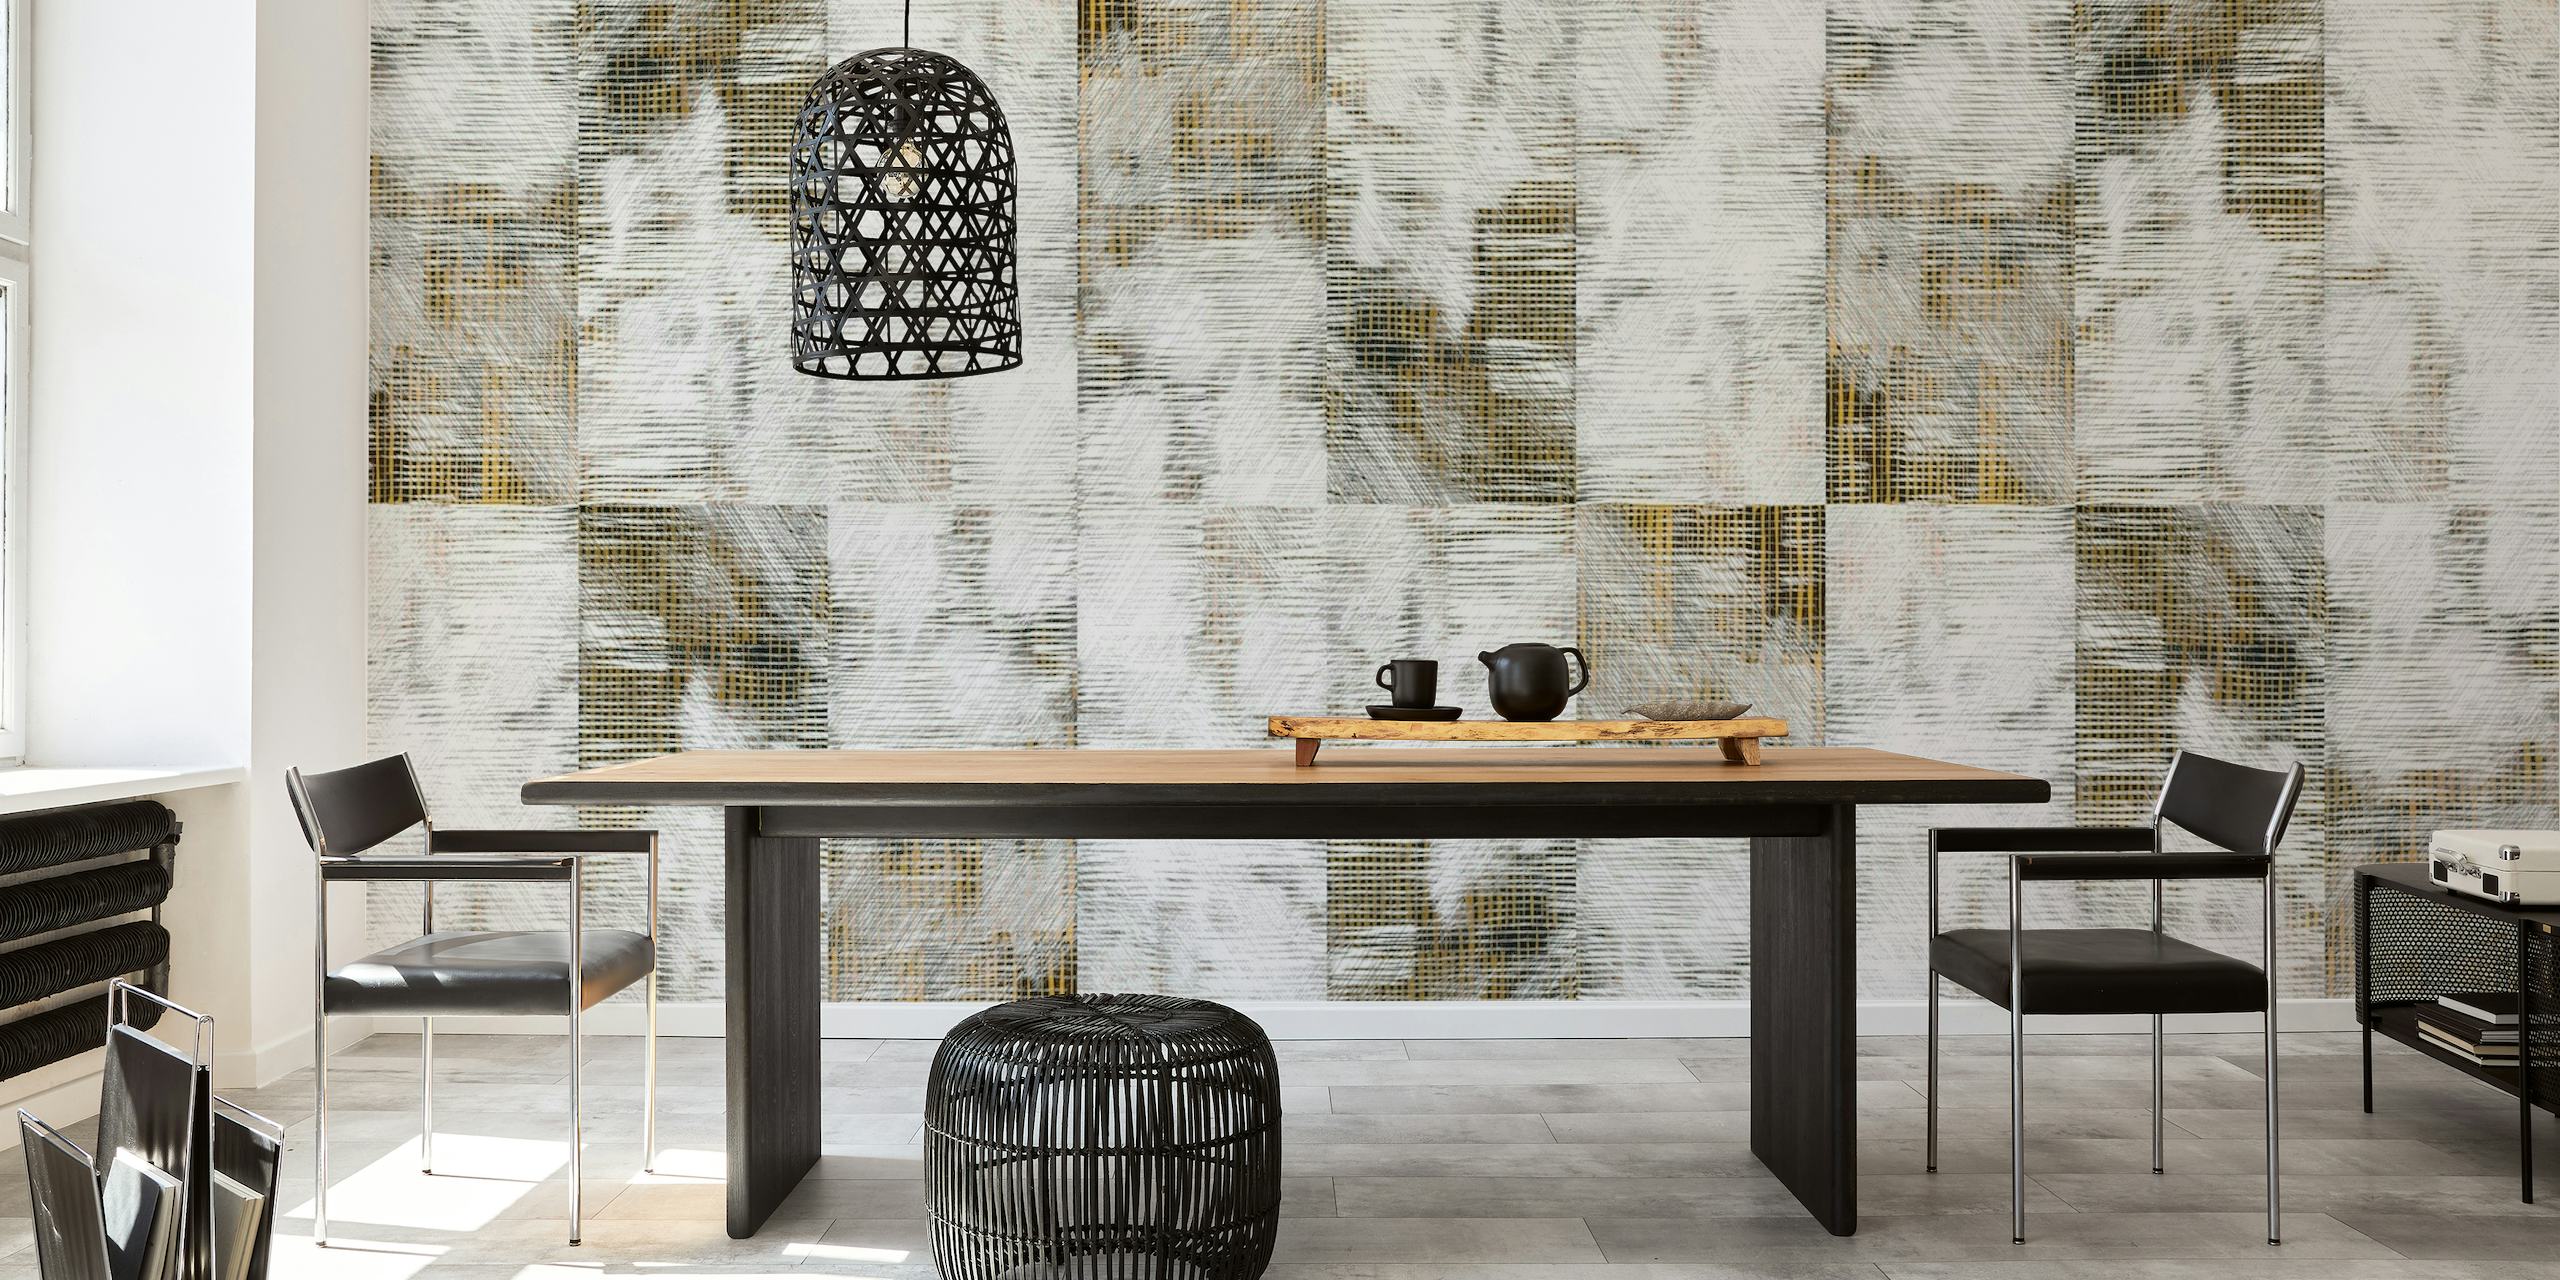 Textured neutral-toned wall mural with a vintage urban design